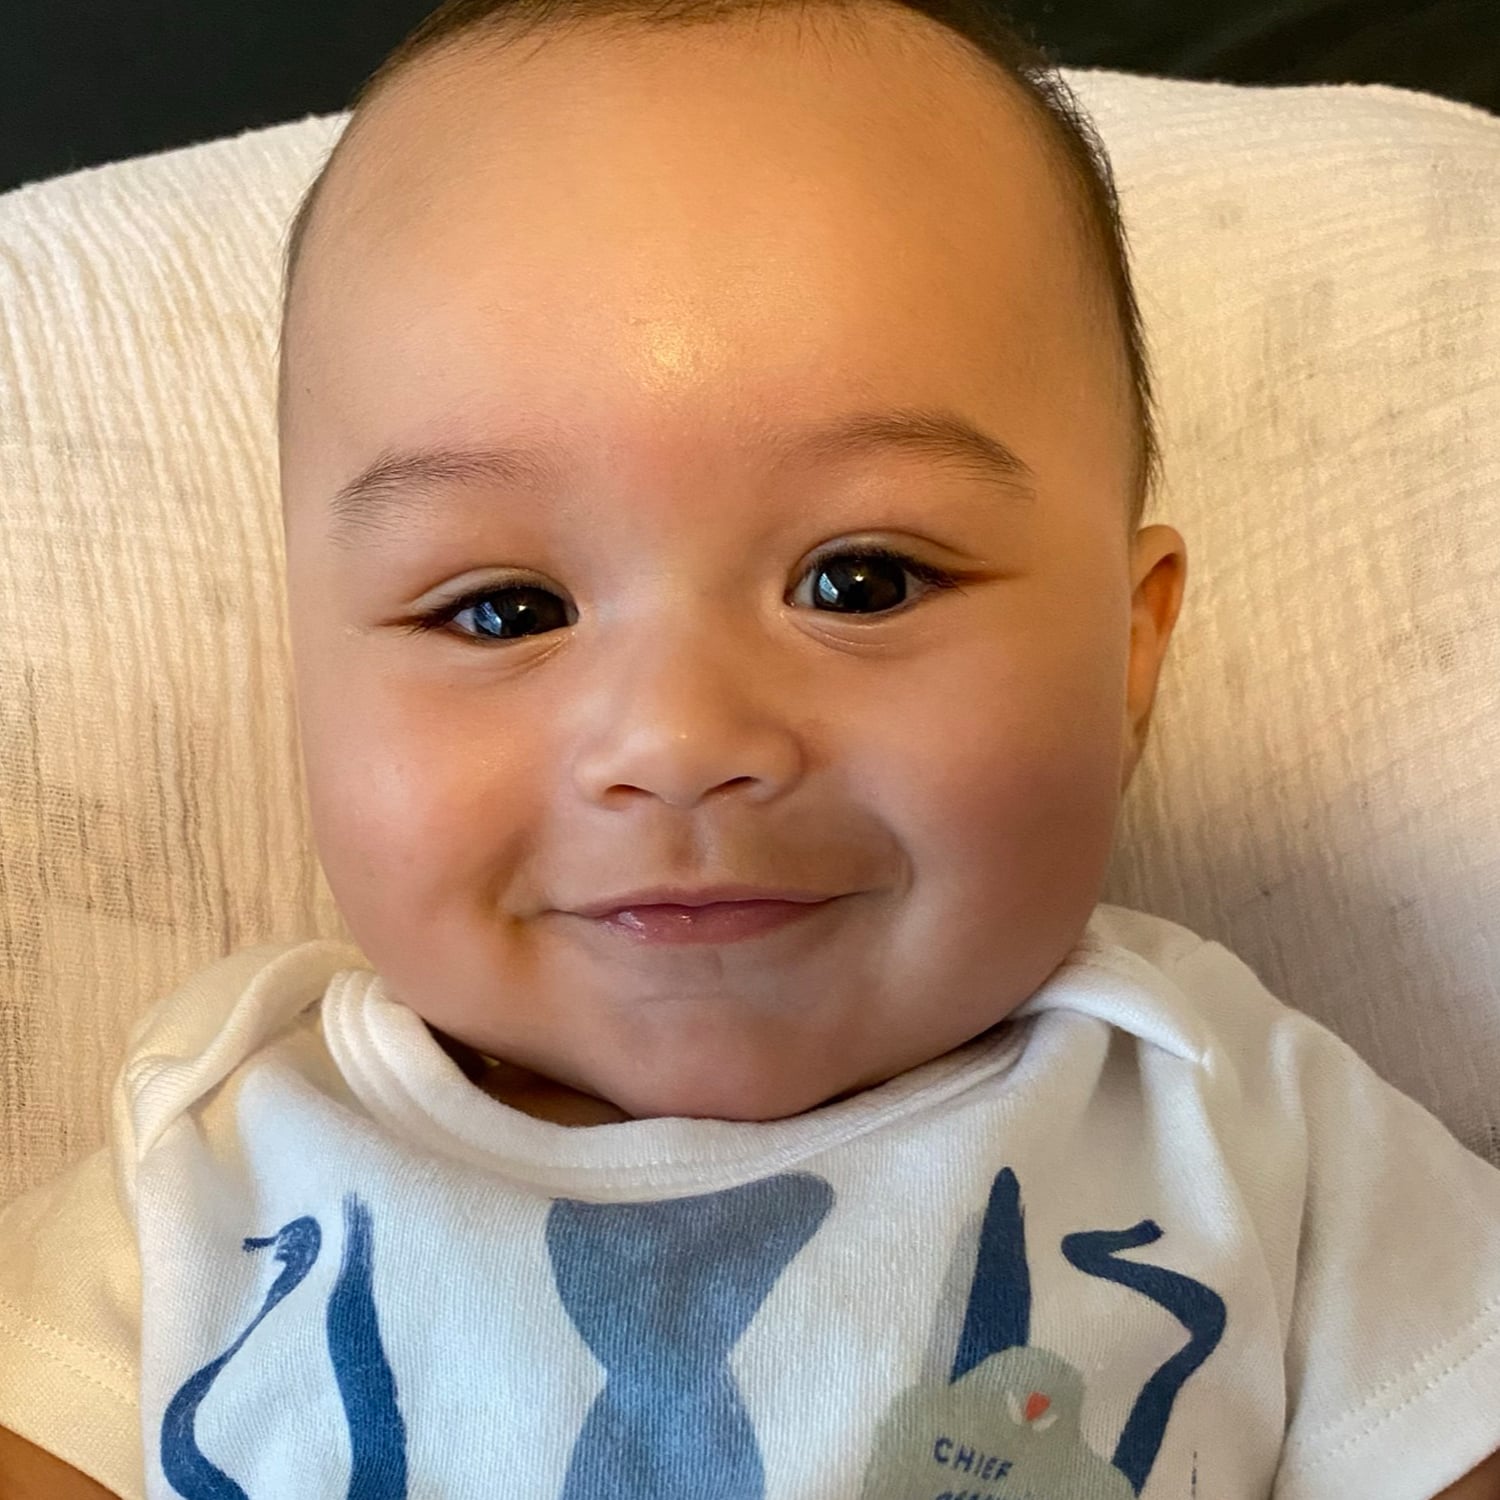 Who is the 2021 Gerber baby?